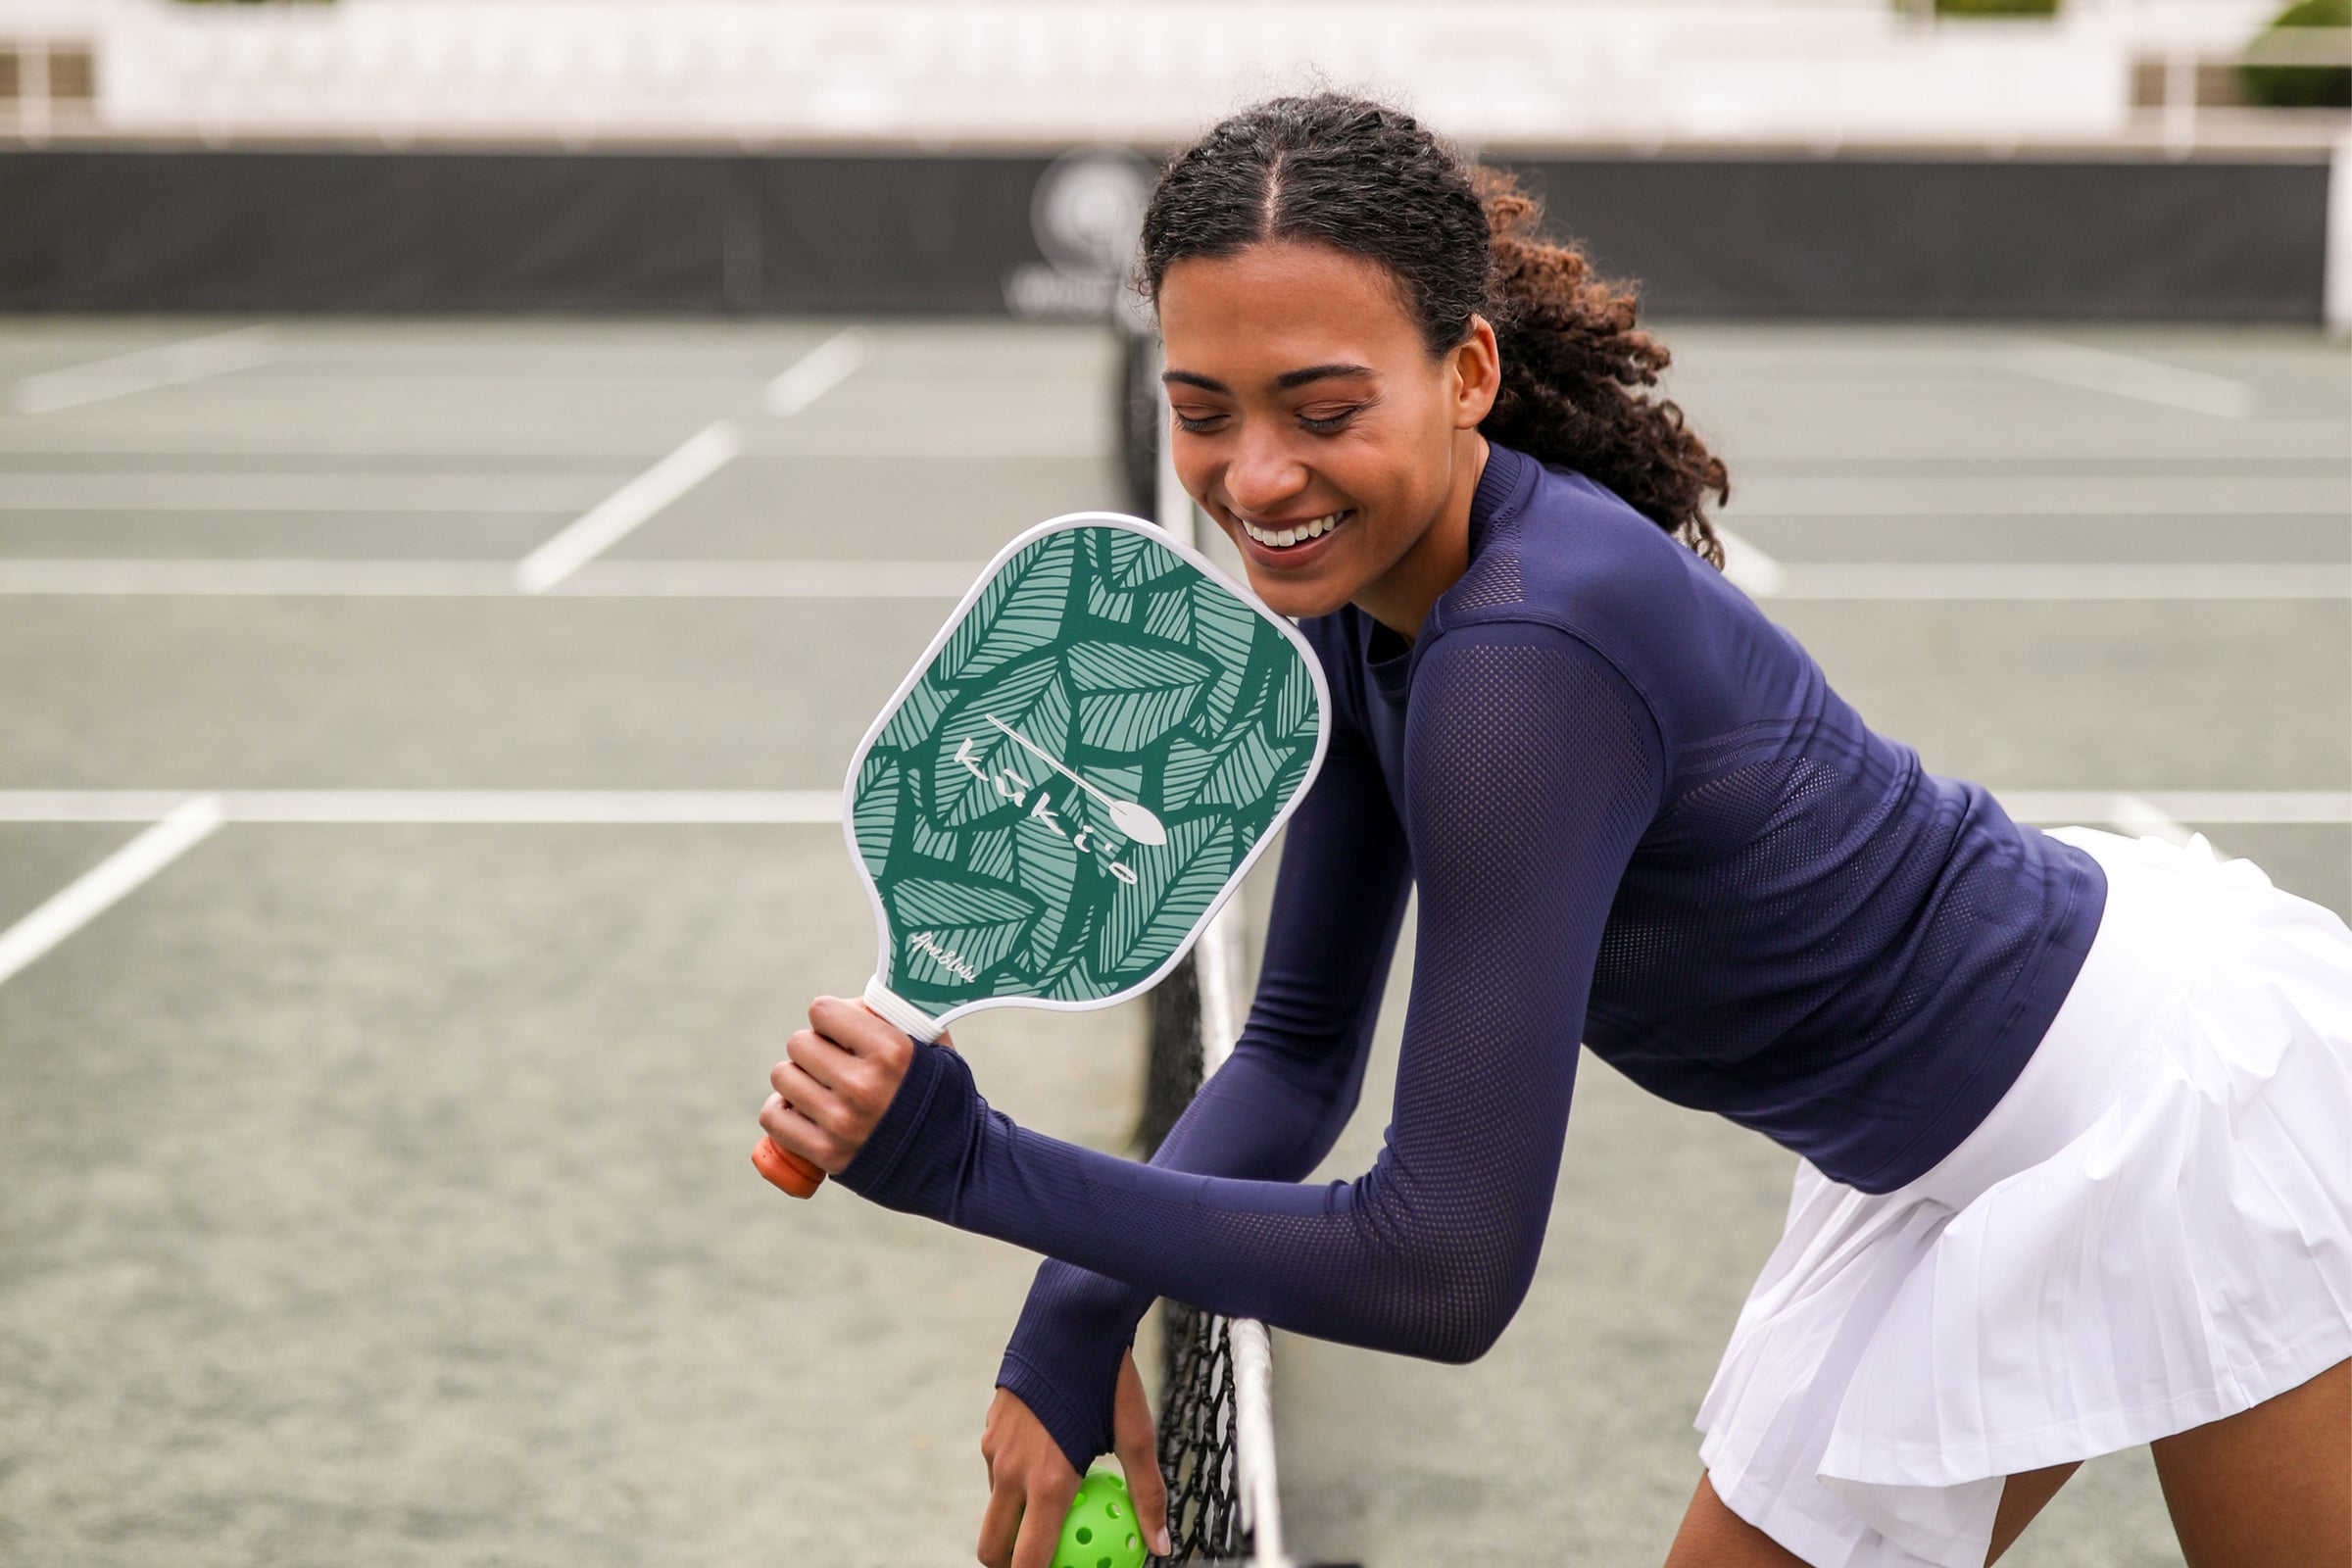 A smiling woman in athletic wear, adorned with active lifestyle accessories, playing pickleball on an outdoor court.